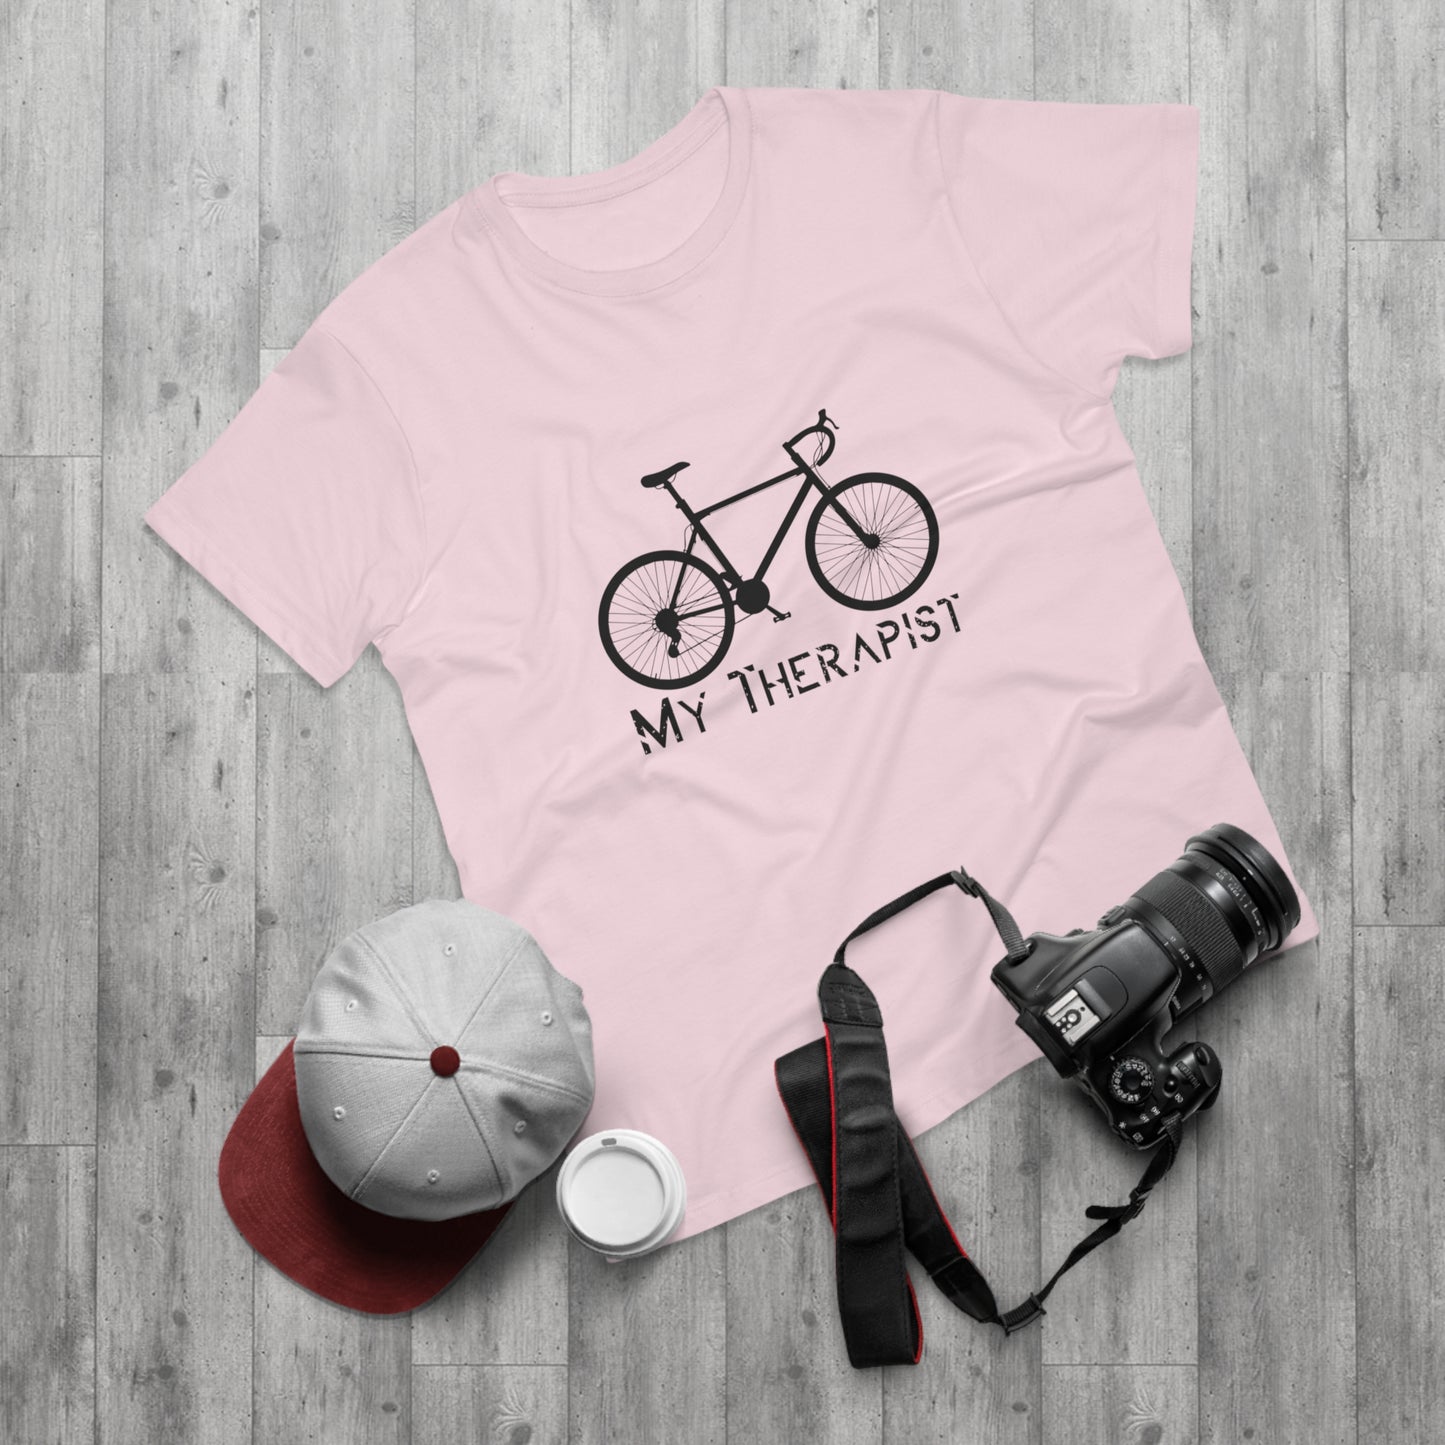 Bicycling is My Therapist Single Jersey Men's T-shirt